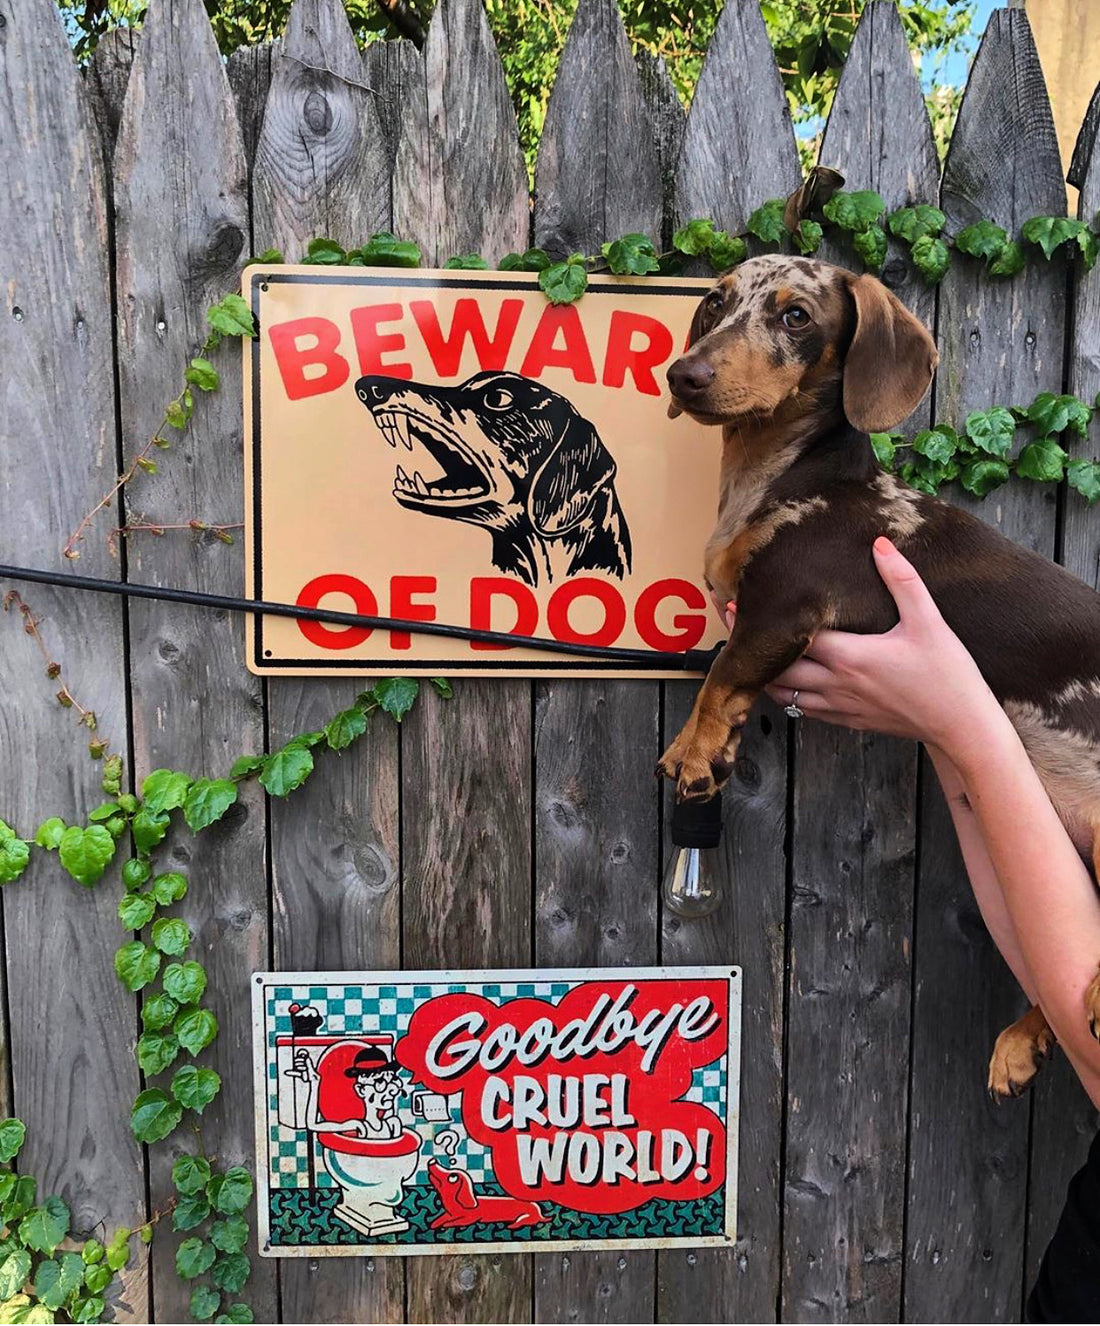 Beware of Dogs Rustic Metal Staked Yard Warning Sign 21 to 33 